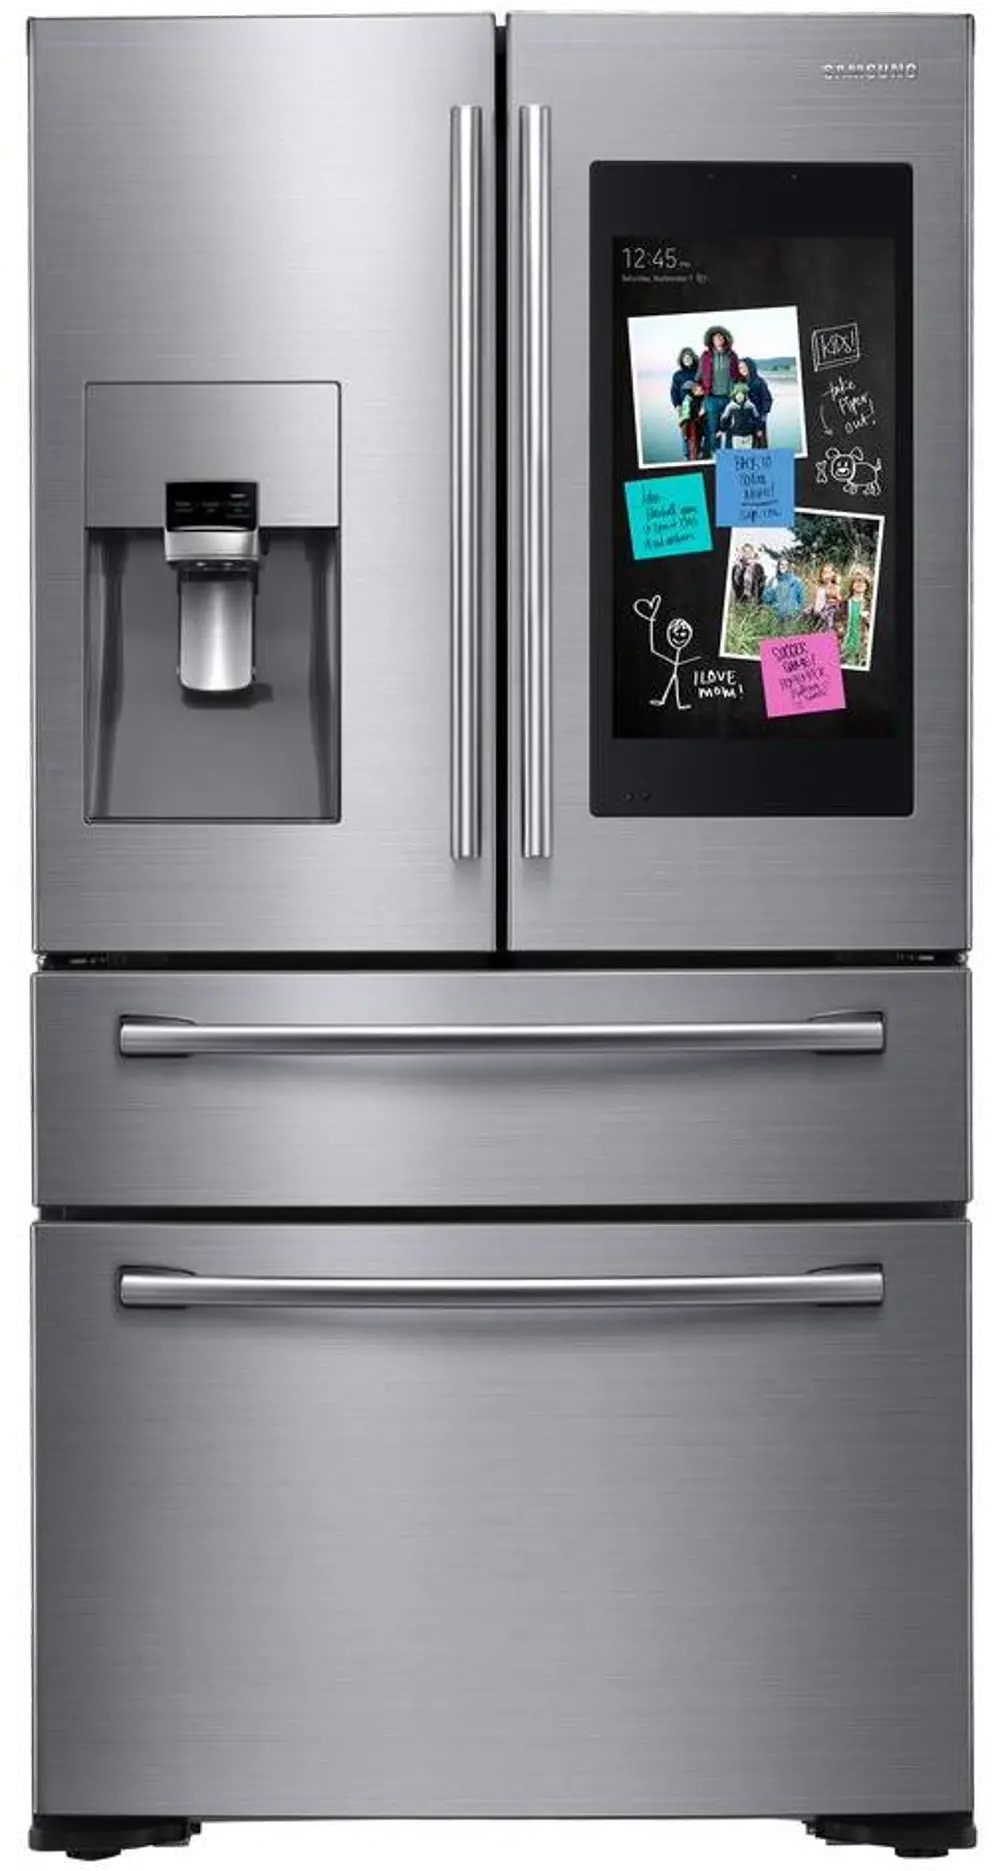 RF22NPEDBSR Samsung Counter Depth Family Hub Smart Refrigerator with 4 Doors - 21.9 cu. ft., 36 Inch Stainless Steel-1